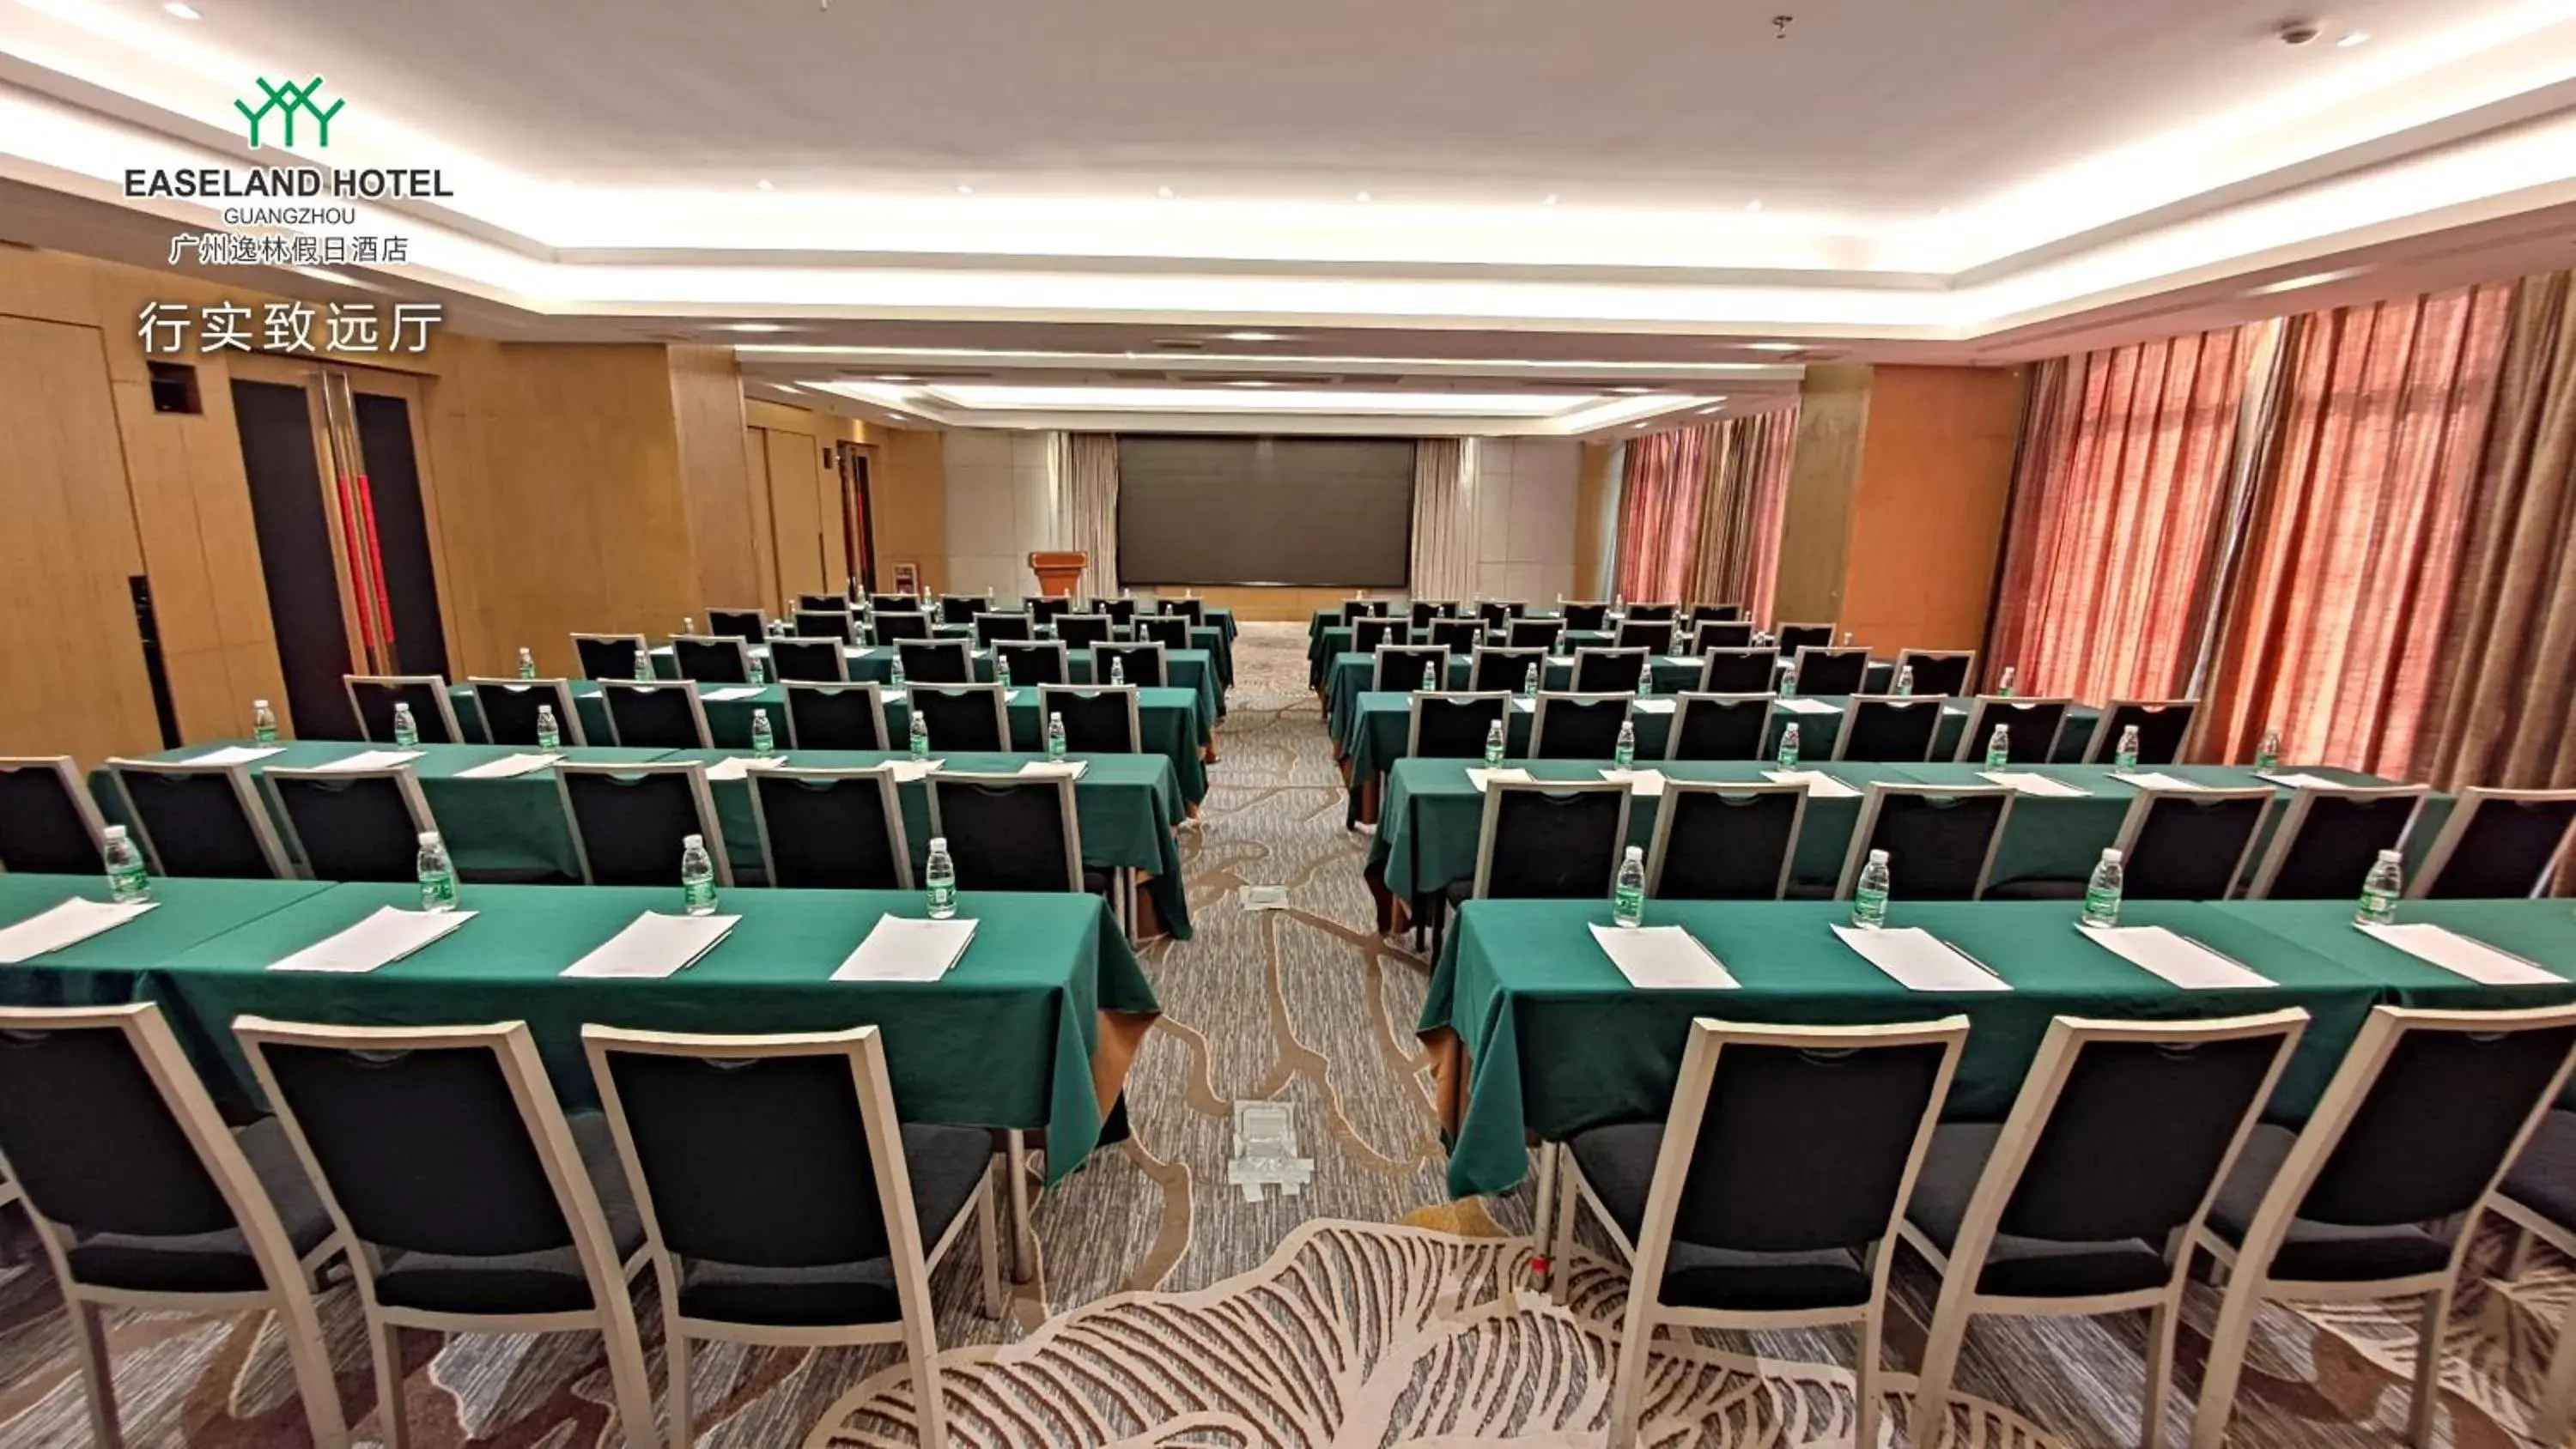 Business facilities in Easeland Hotel